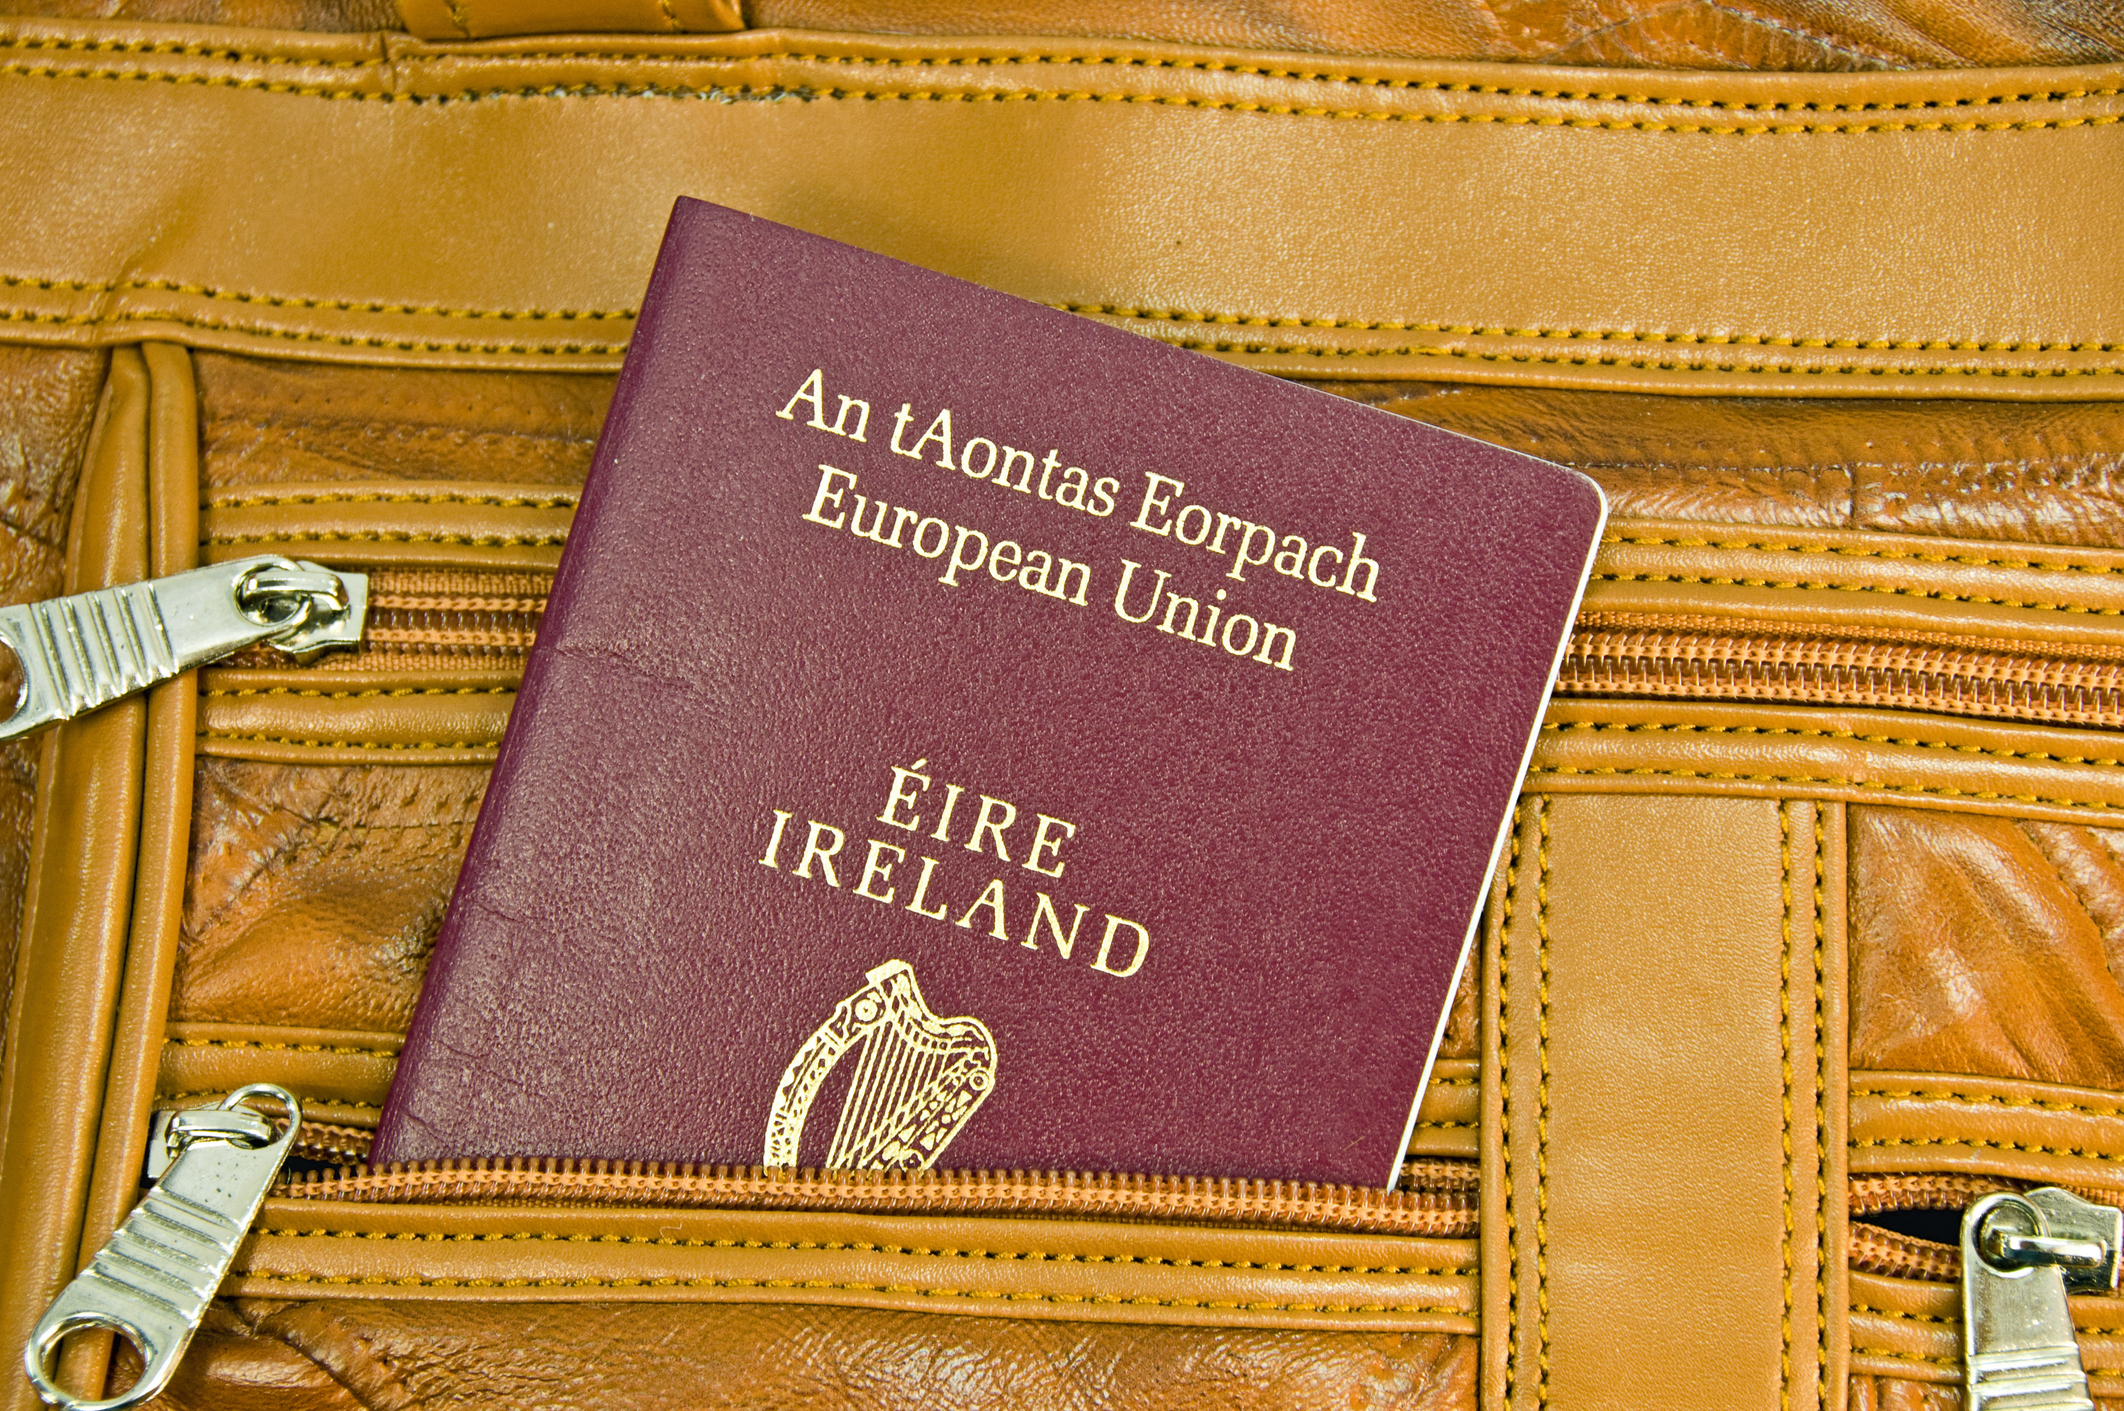 Does My Irish Great Grandfather Make Me Eligible for a Passport?